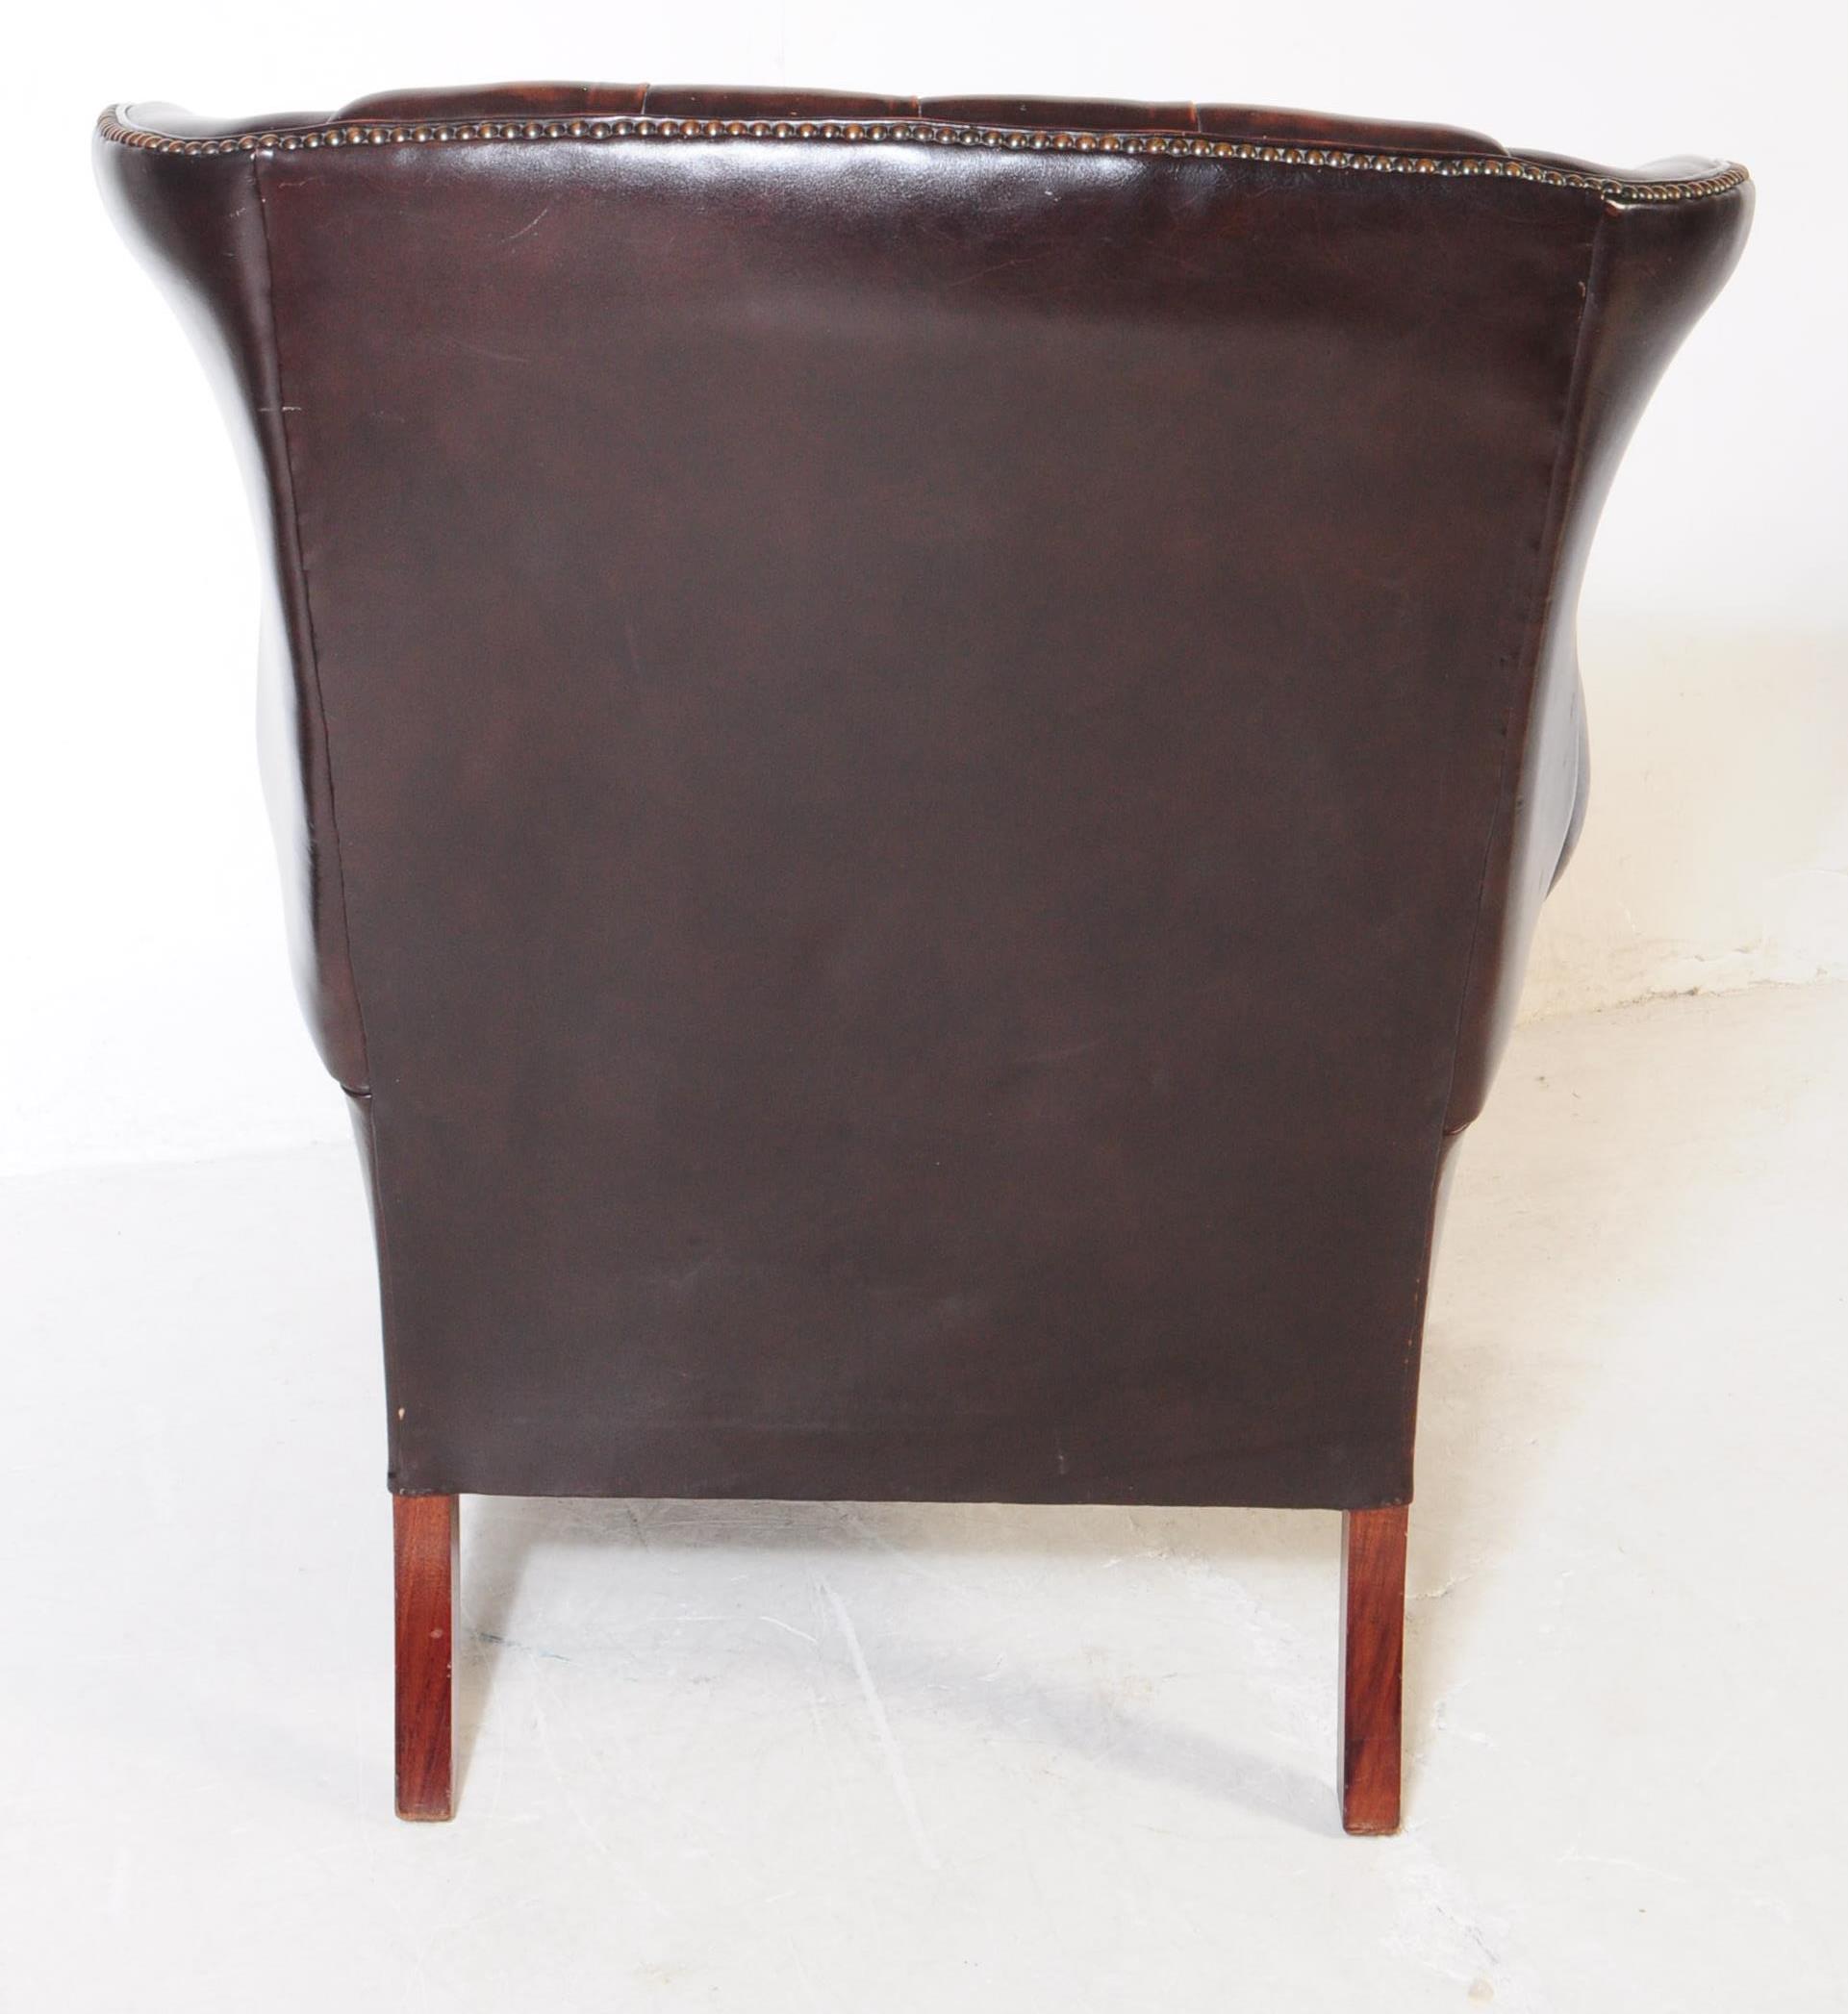 CHESTERFIELD STYLE BROWN LEATHER WINGBACK ARMCHAIR - Image 4 of 4